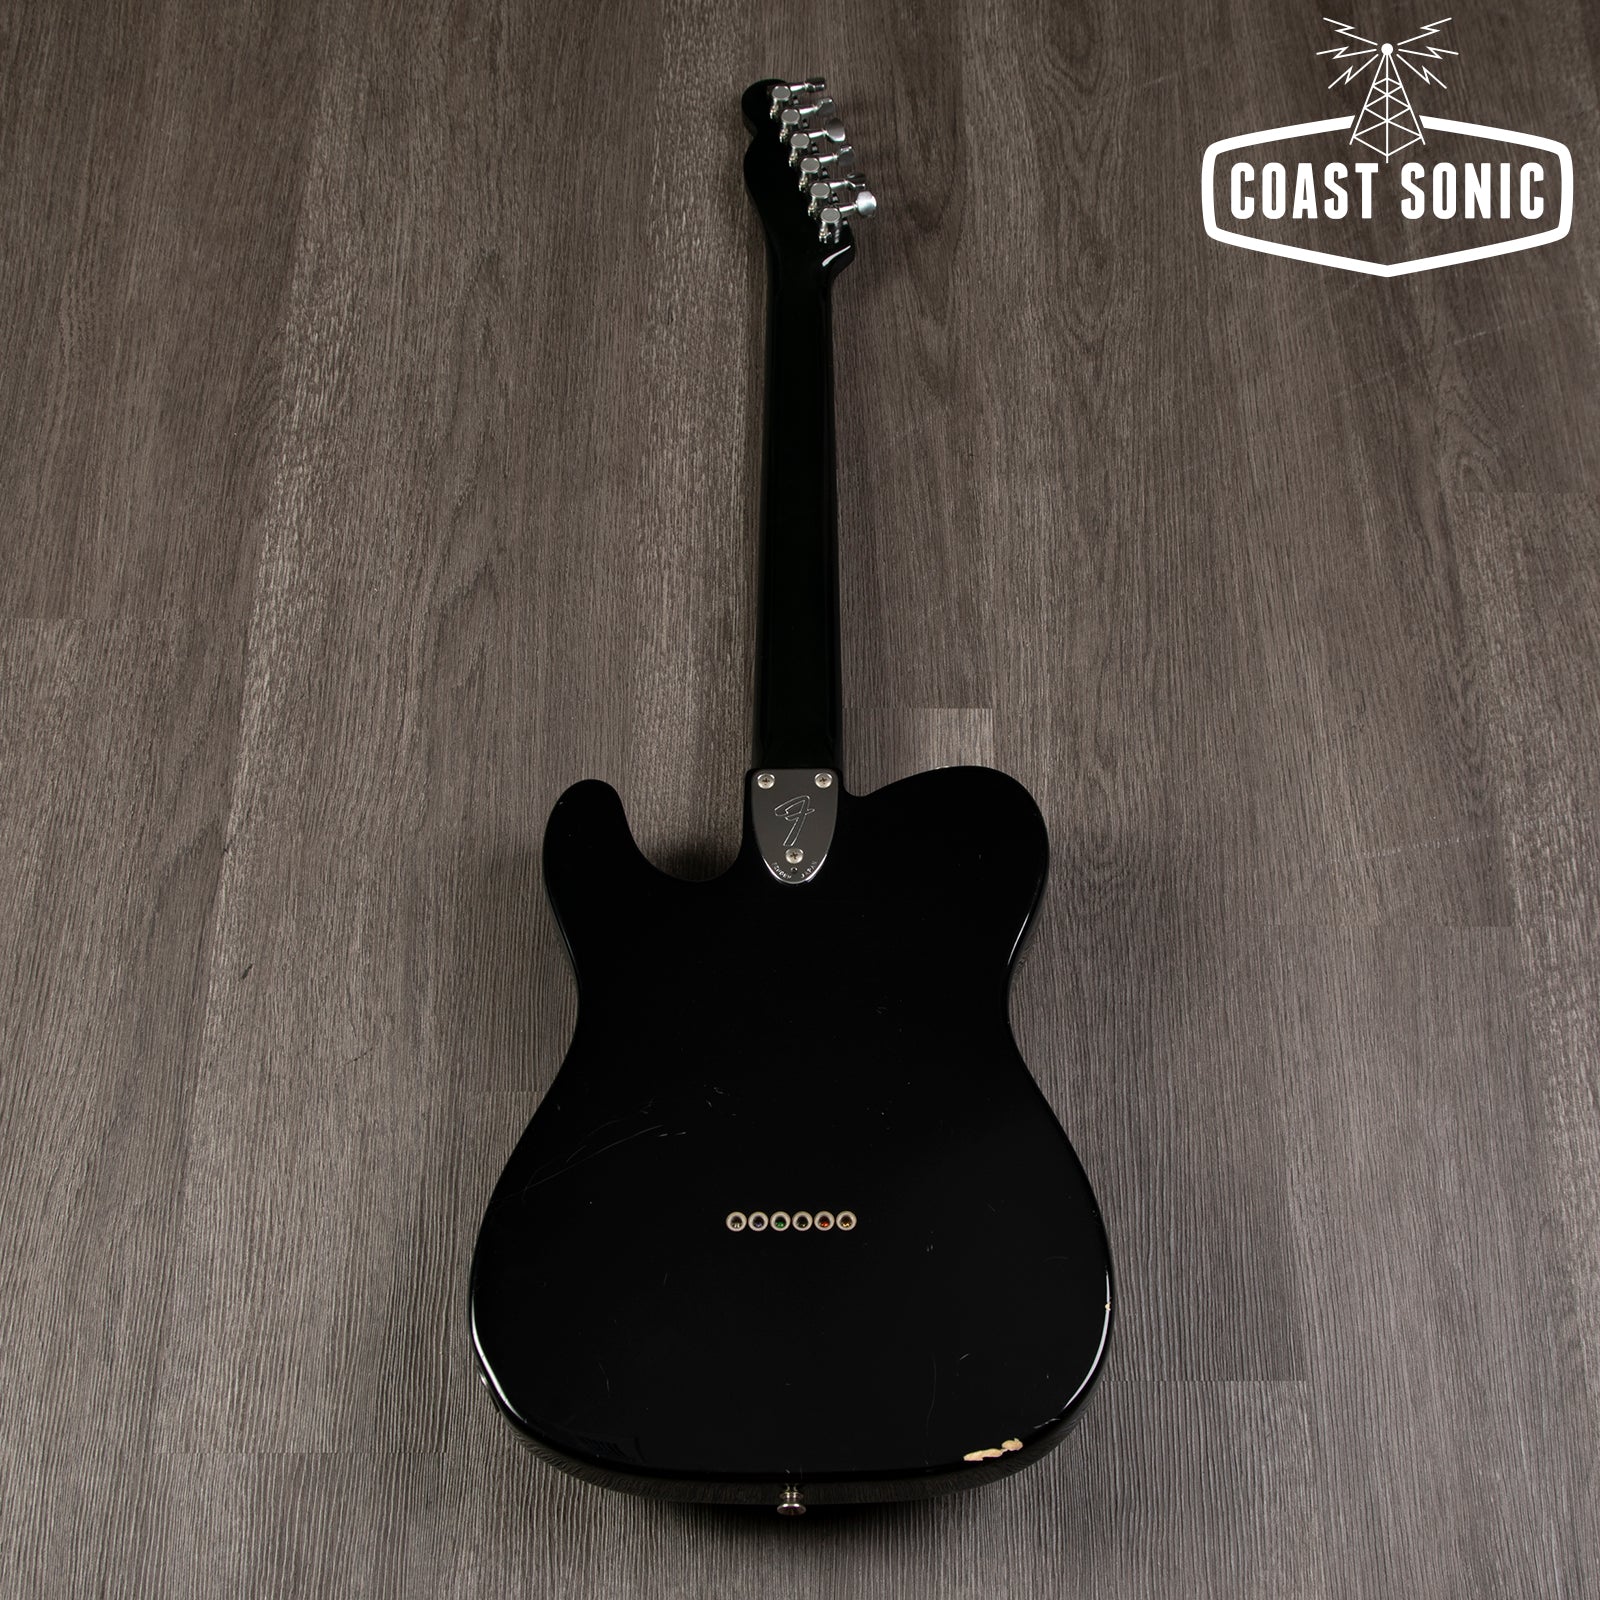 1986 Fender Telecaster Custom TC72 All-Black Made in Japan w/ Rare painted Neck and Headstock